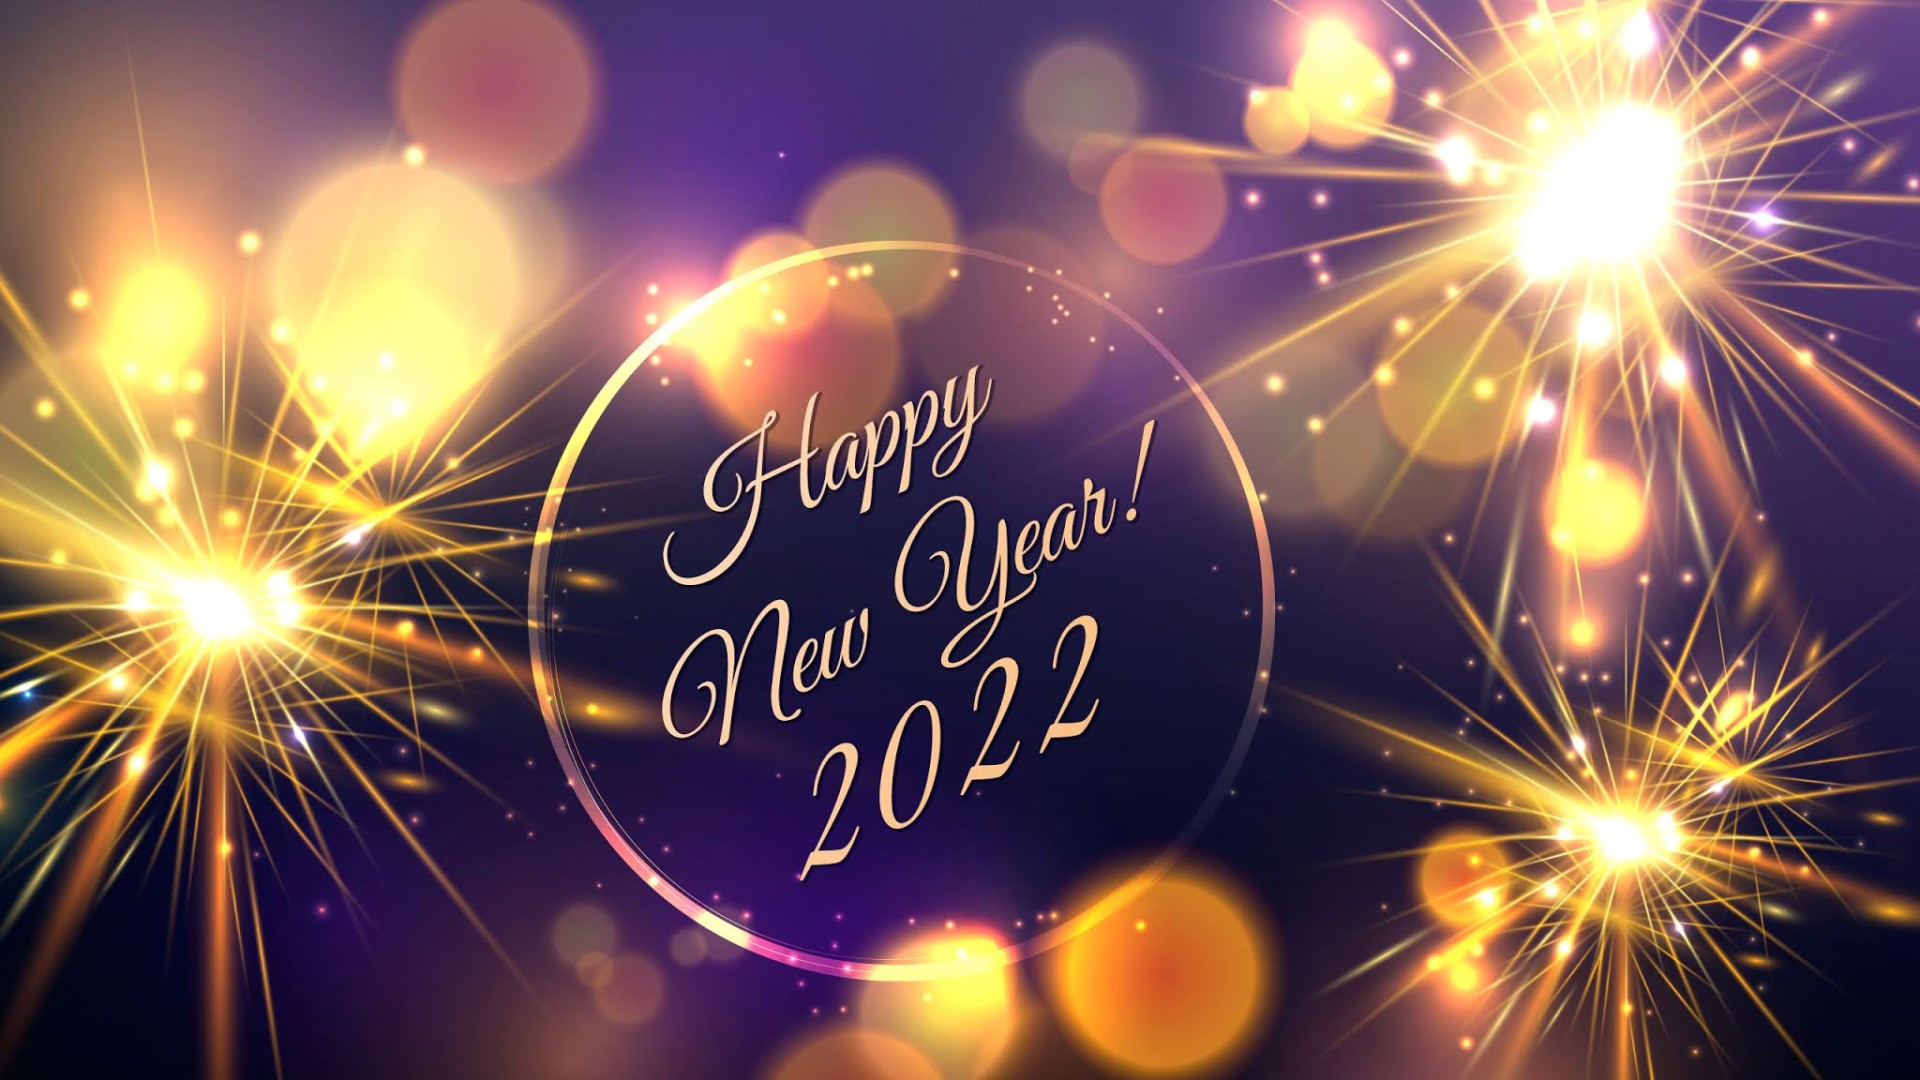 New Year 2022 background picture